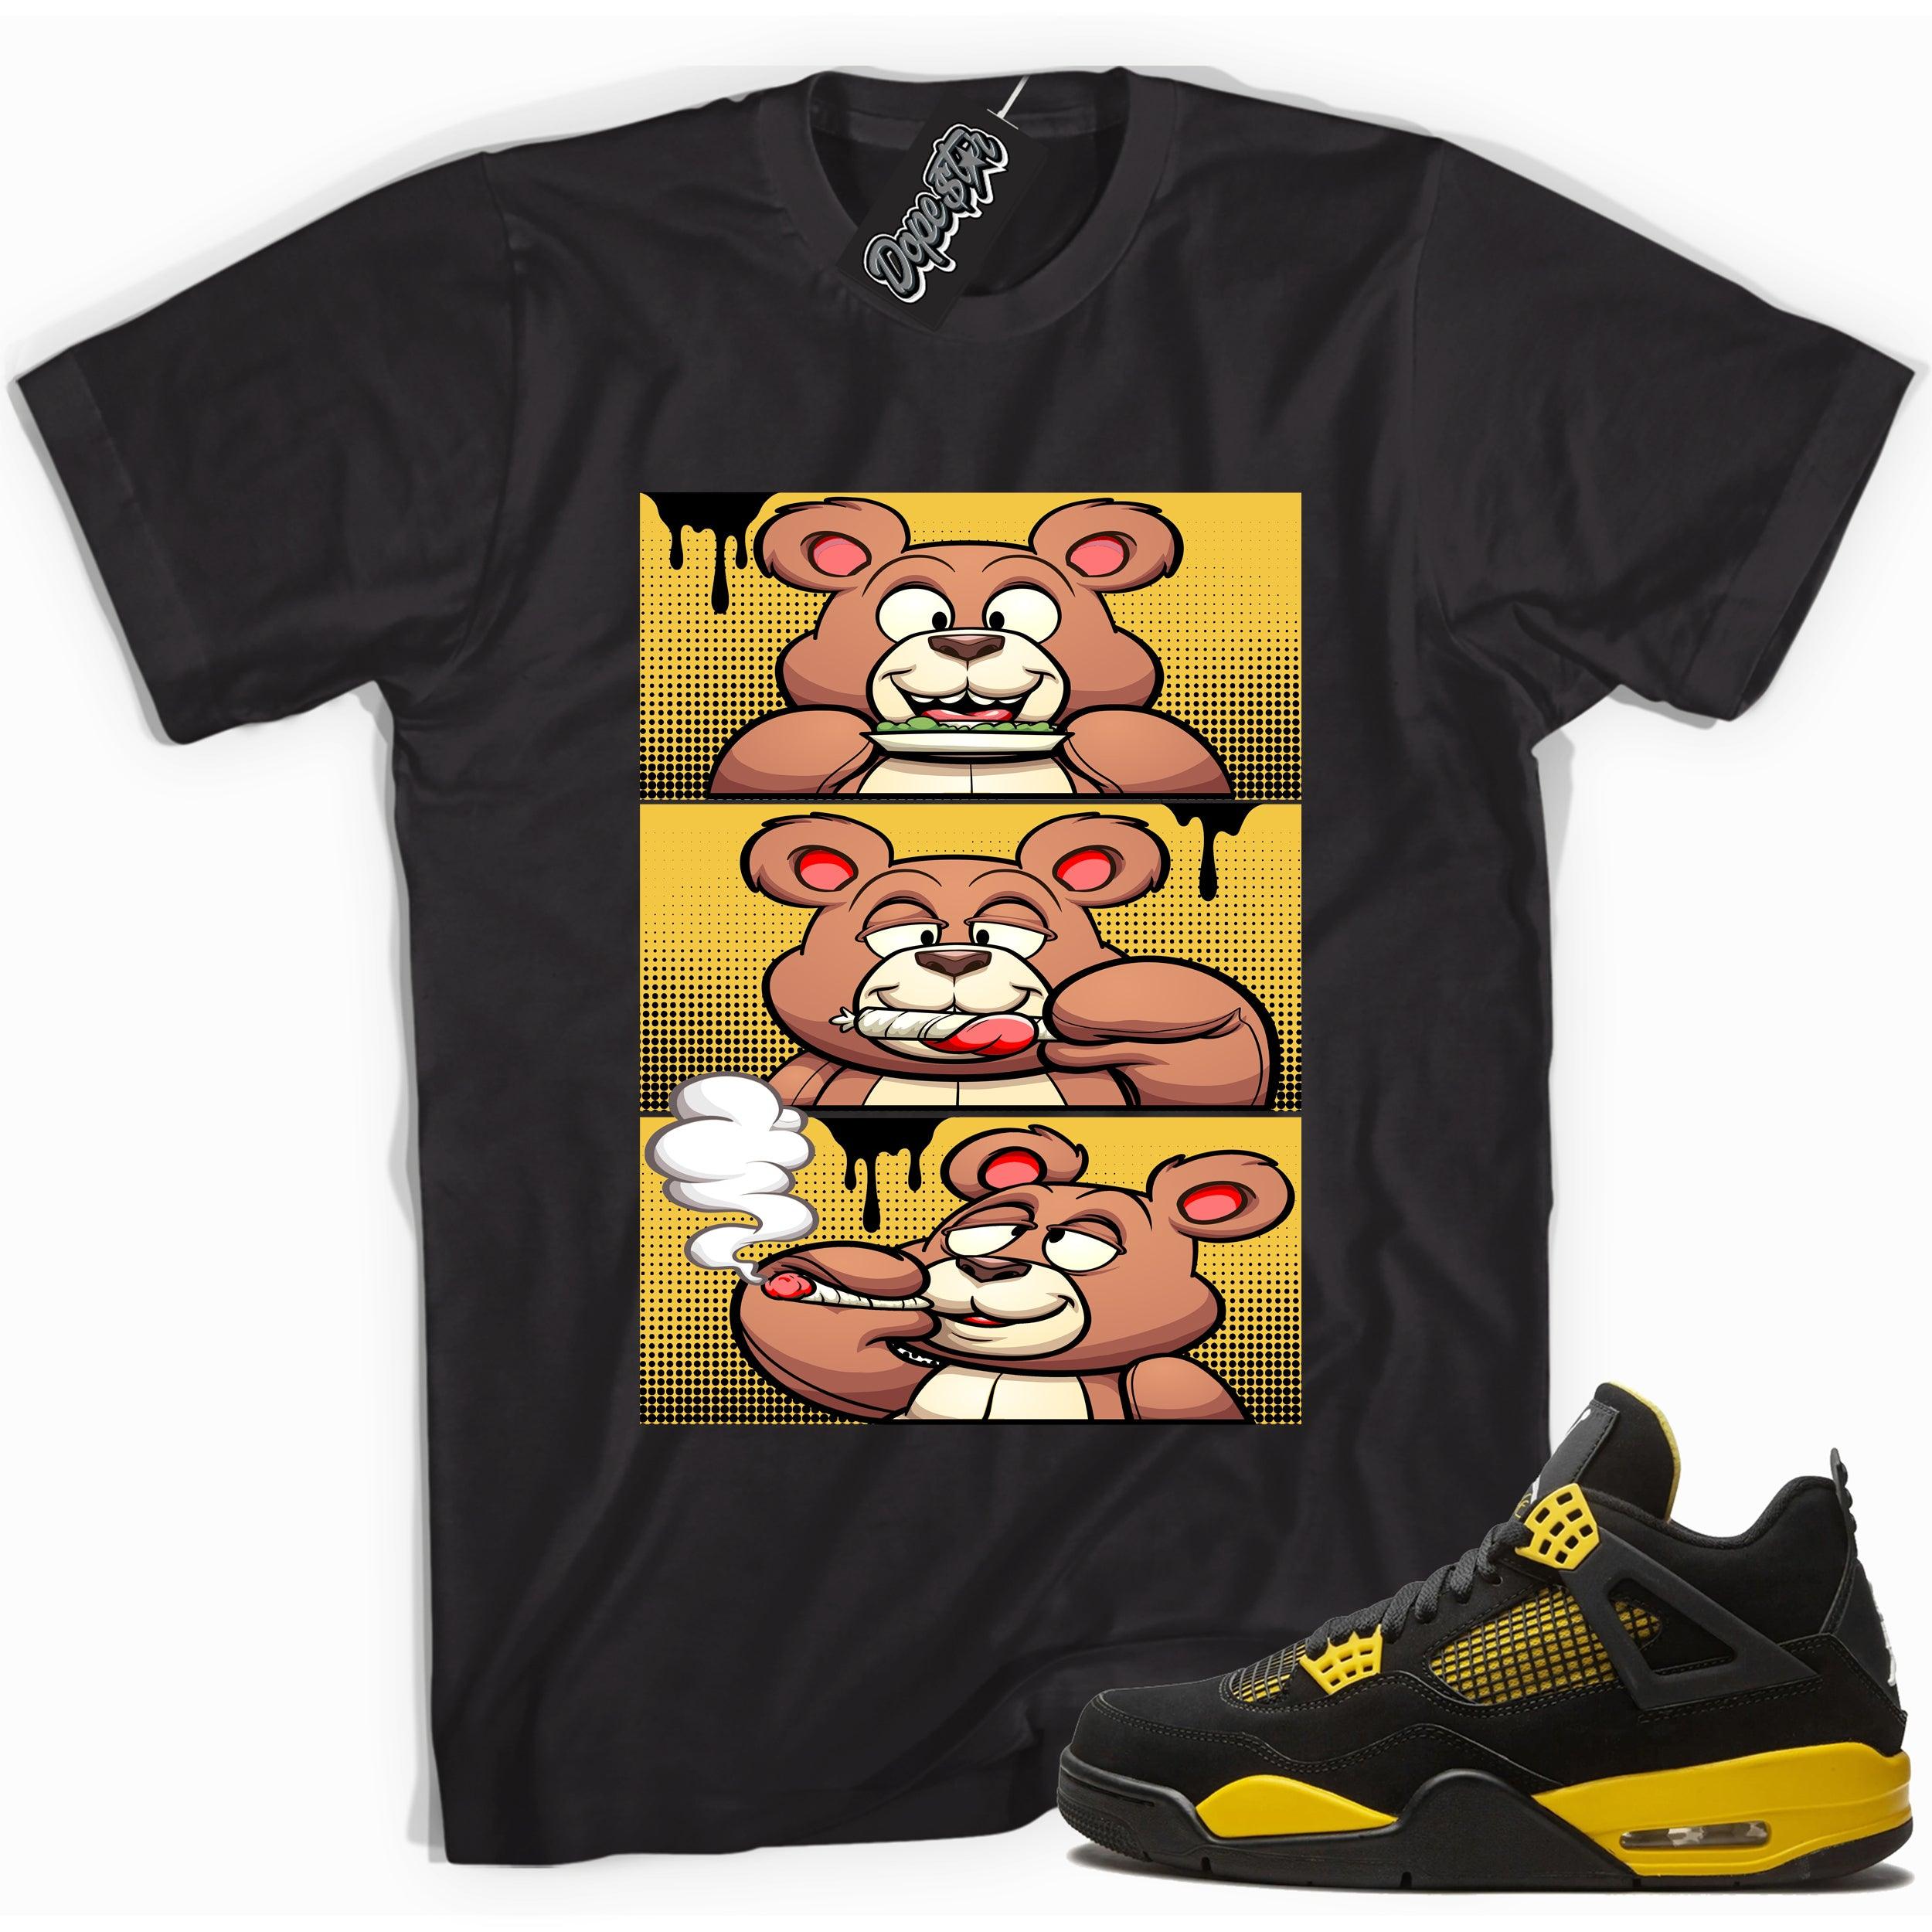 Cool black graphic tee with 'roll it lick it smoke it' print, that perfectly matches  Air Jordan 4 Thunder sneakers